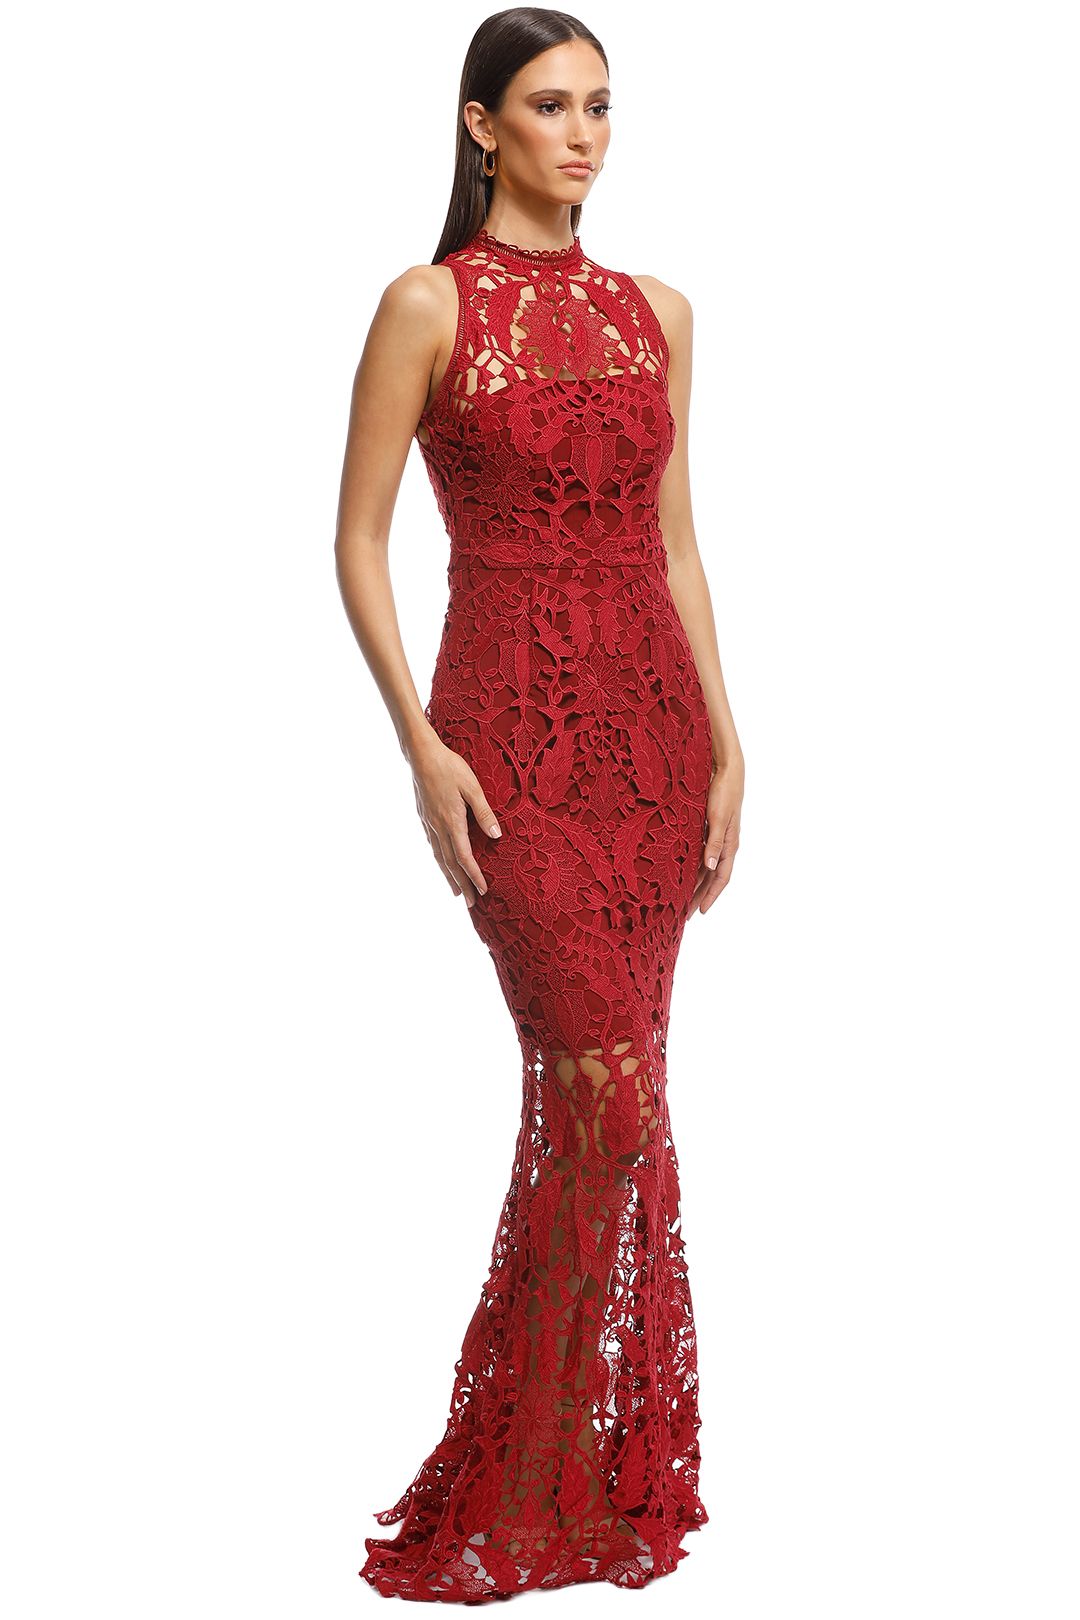 Grace and Hart - Prosecco Gown - Red - Side